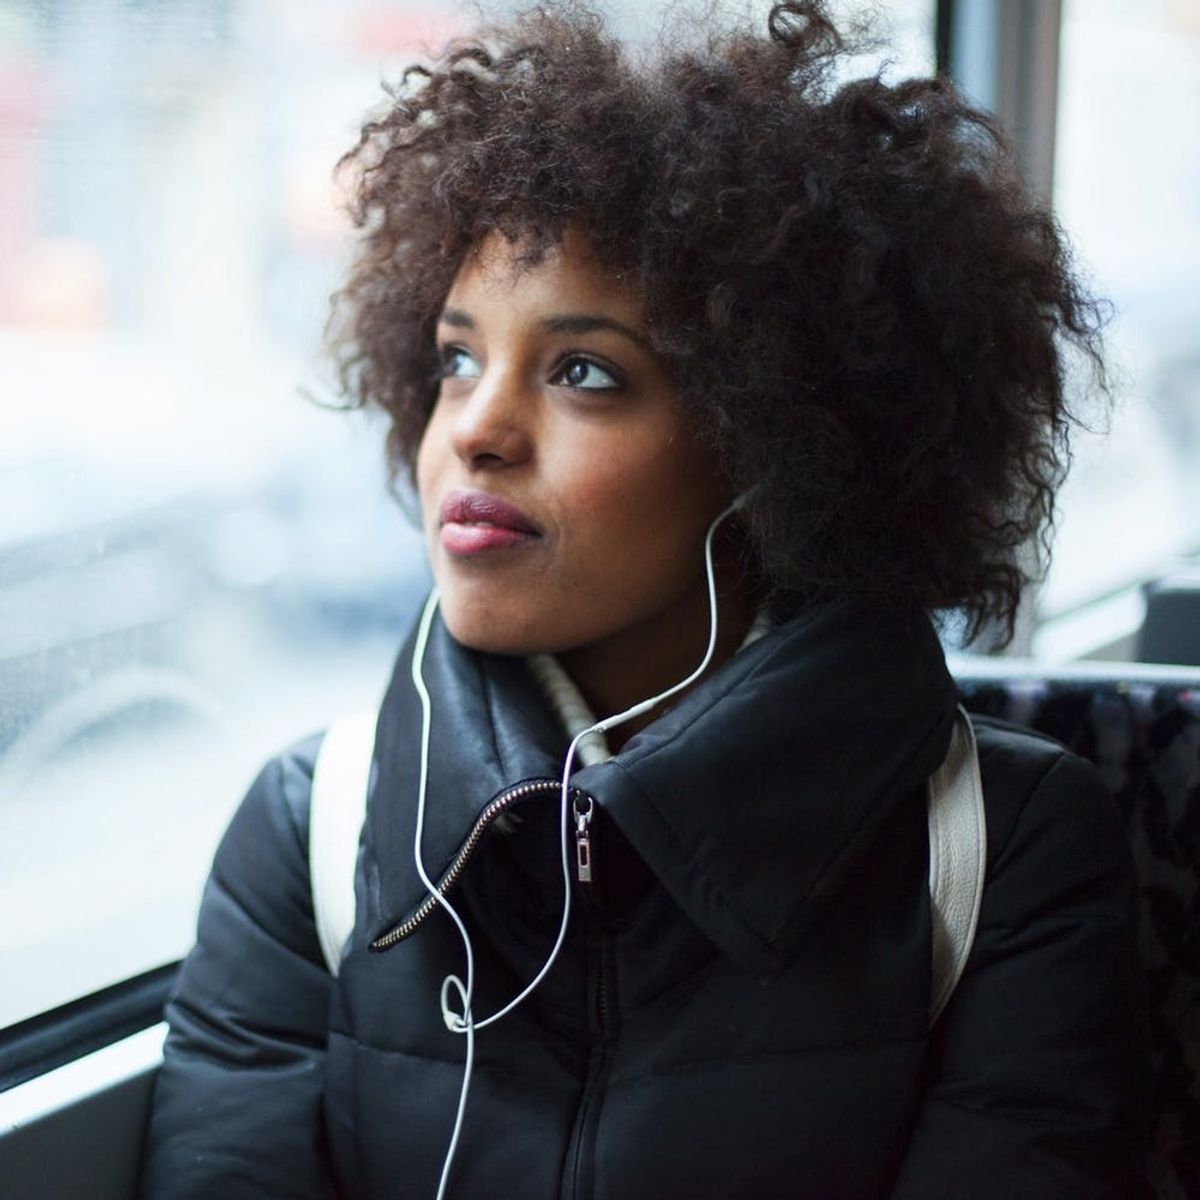 13 Podcasts That Will Make Managing Money a Breeze